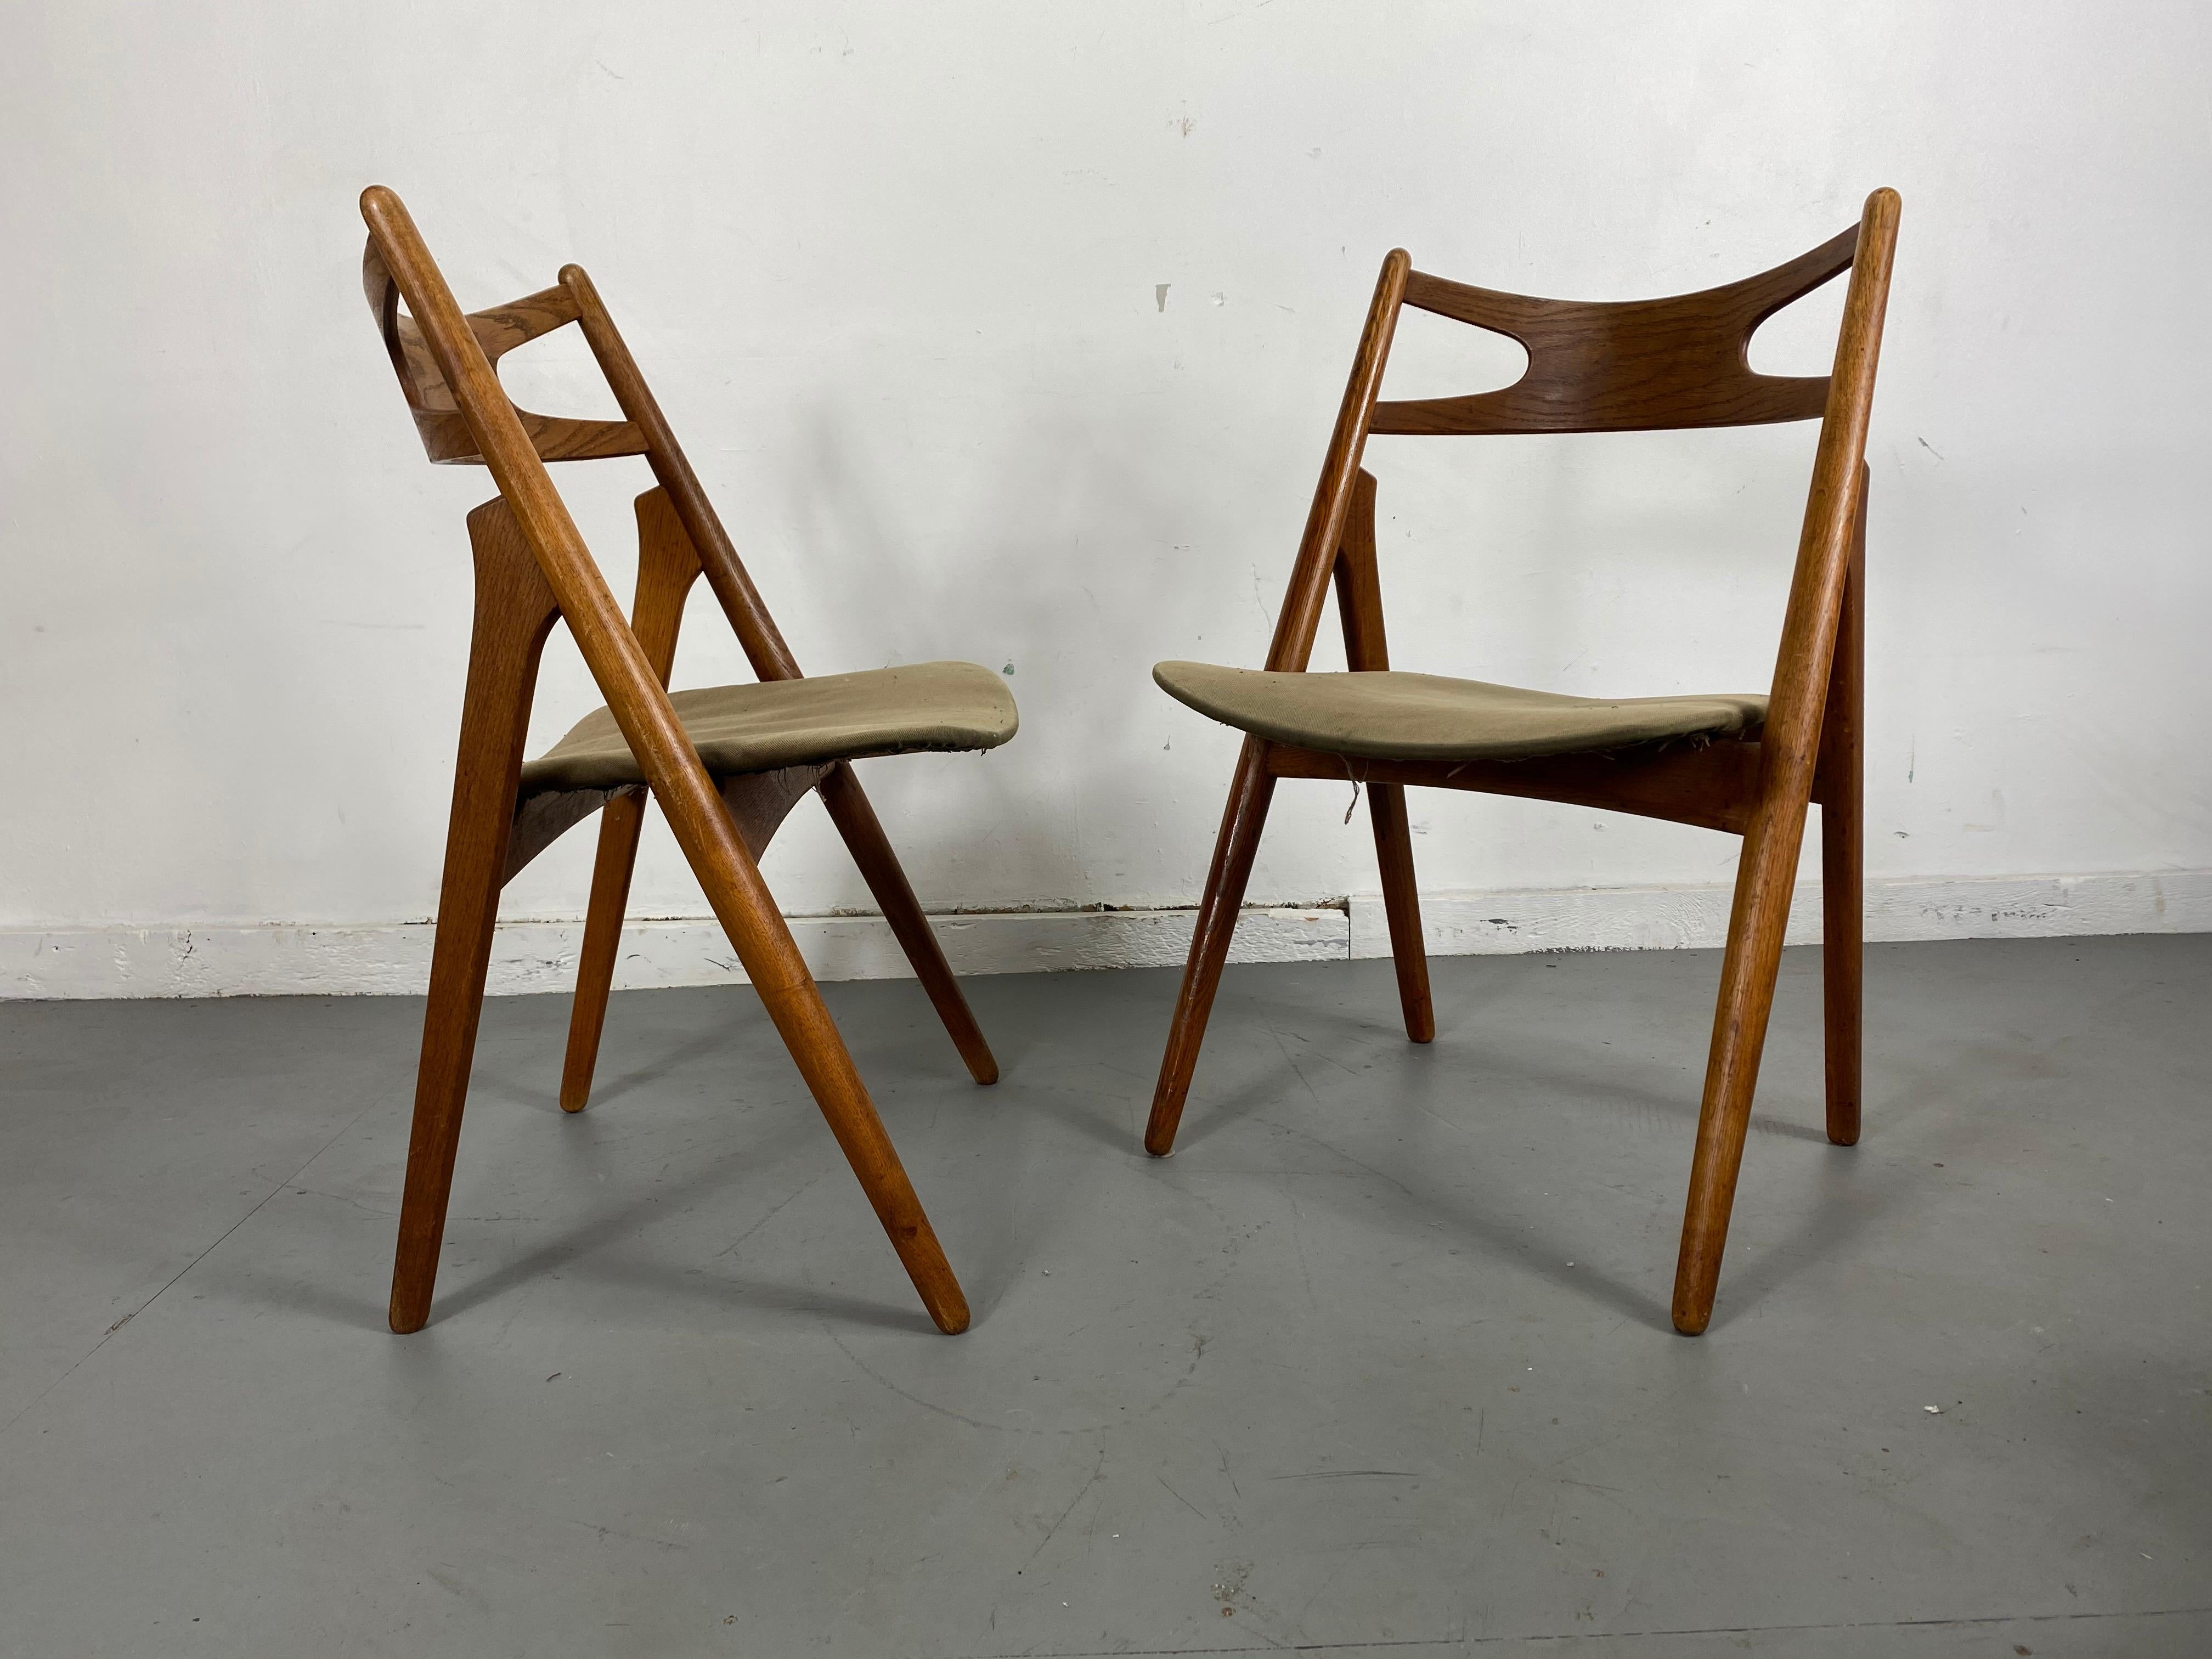 Hans J. Wegner for Carl Hansen & Søn, set of four 'Sawbuck' CH29 chairs, oak, Denmark, 1952.
This set of four chairs is designed by Hans J. Wegner for Carl Hansen. Upholstered seats, fabric removed from one seat to show construction. Nice original